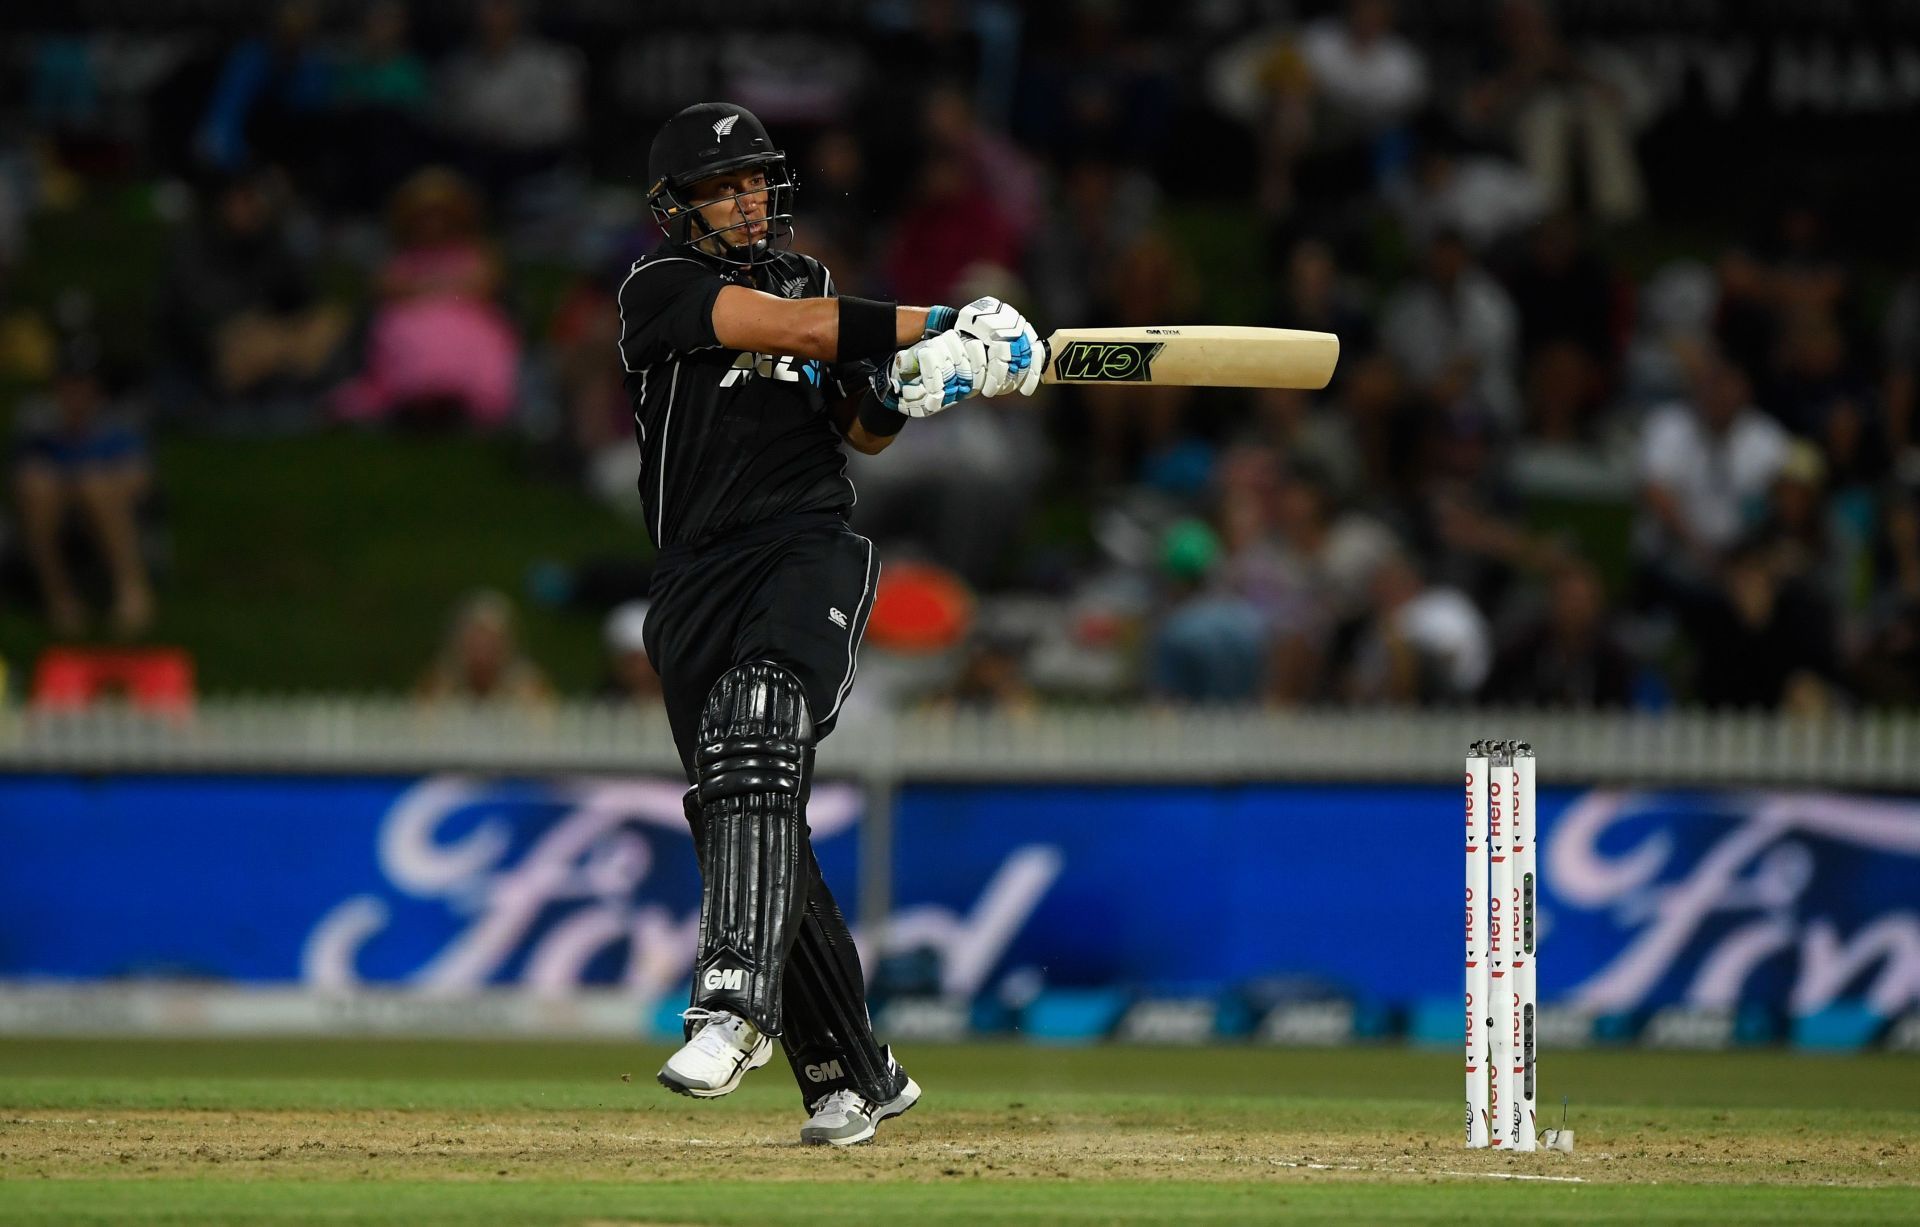 Ross Taylor has been a behemoth for New Zealand in ODIs.